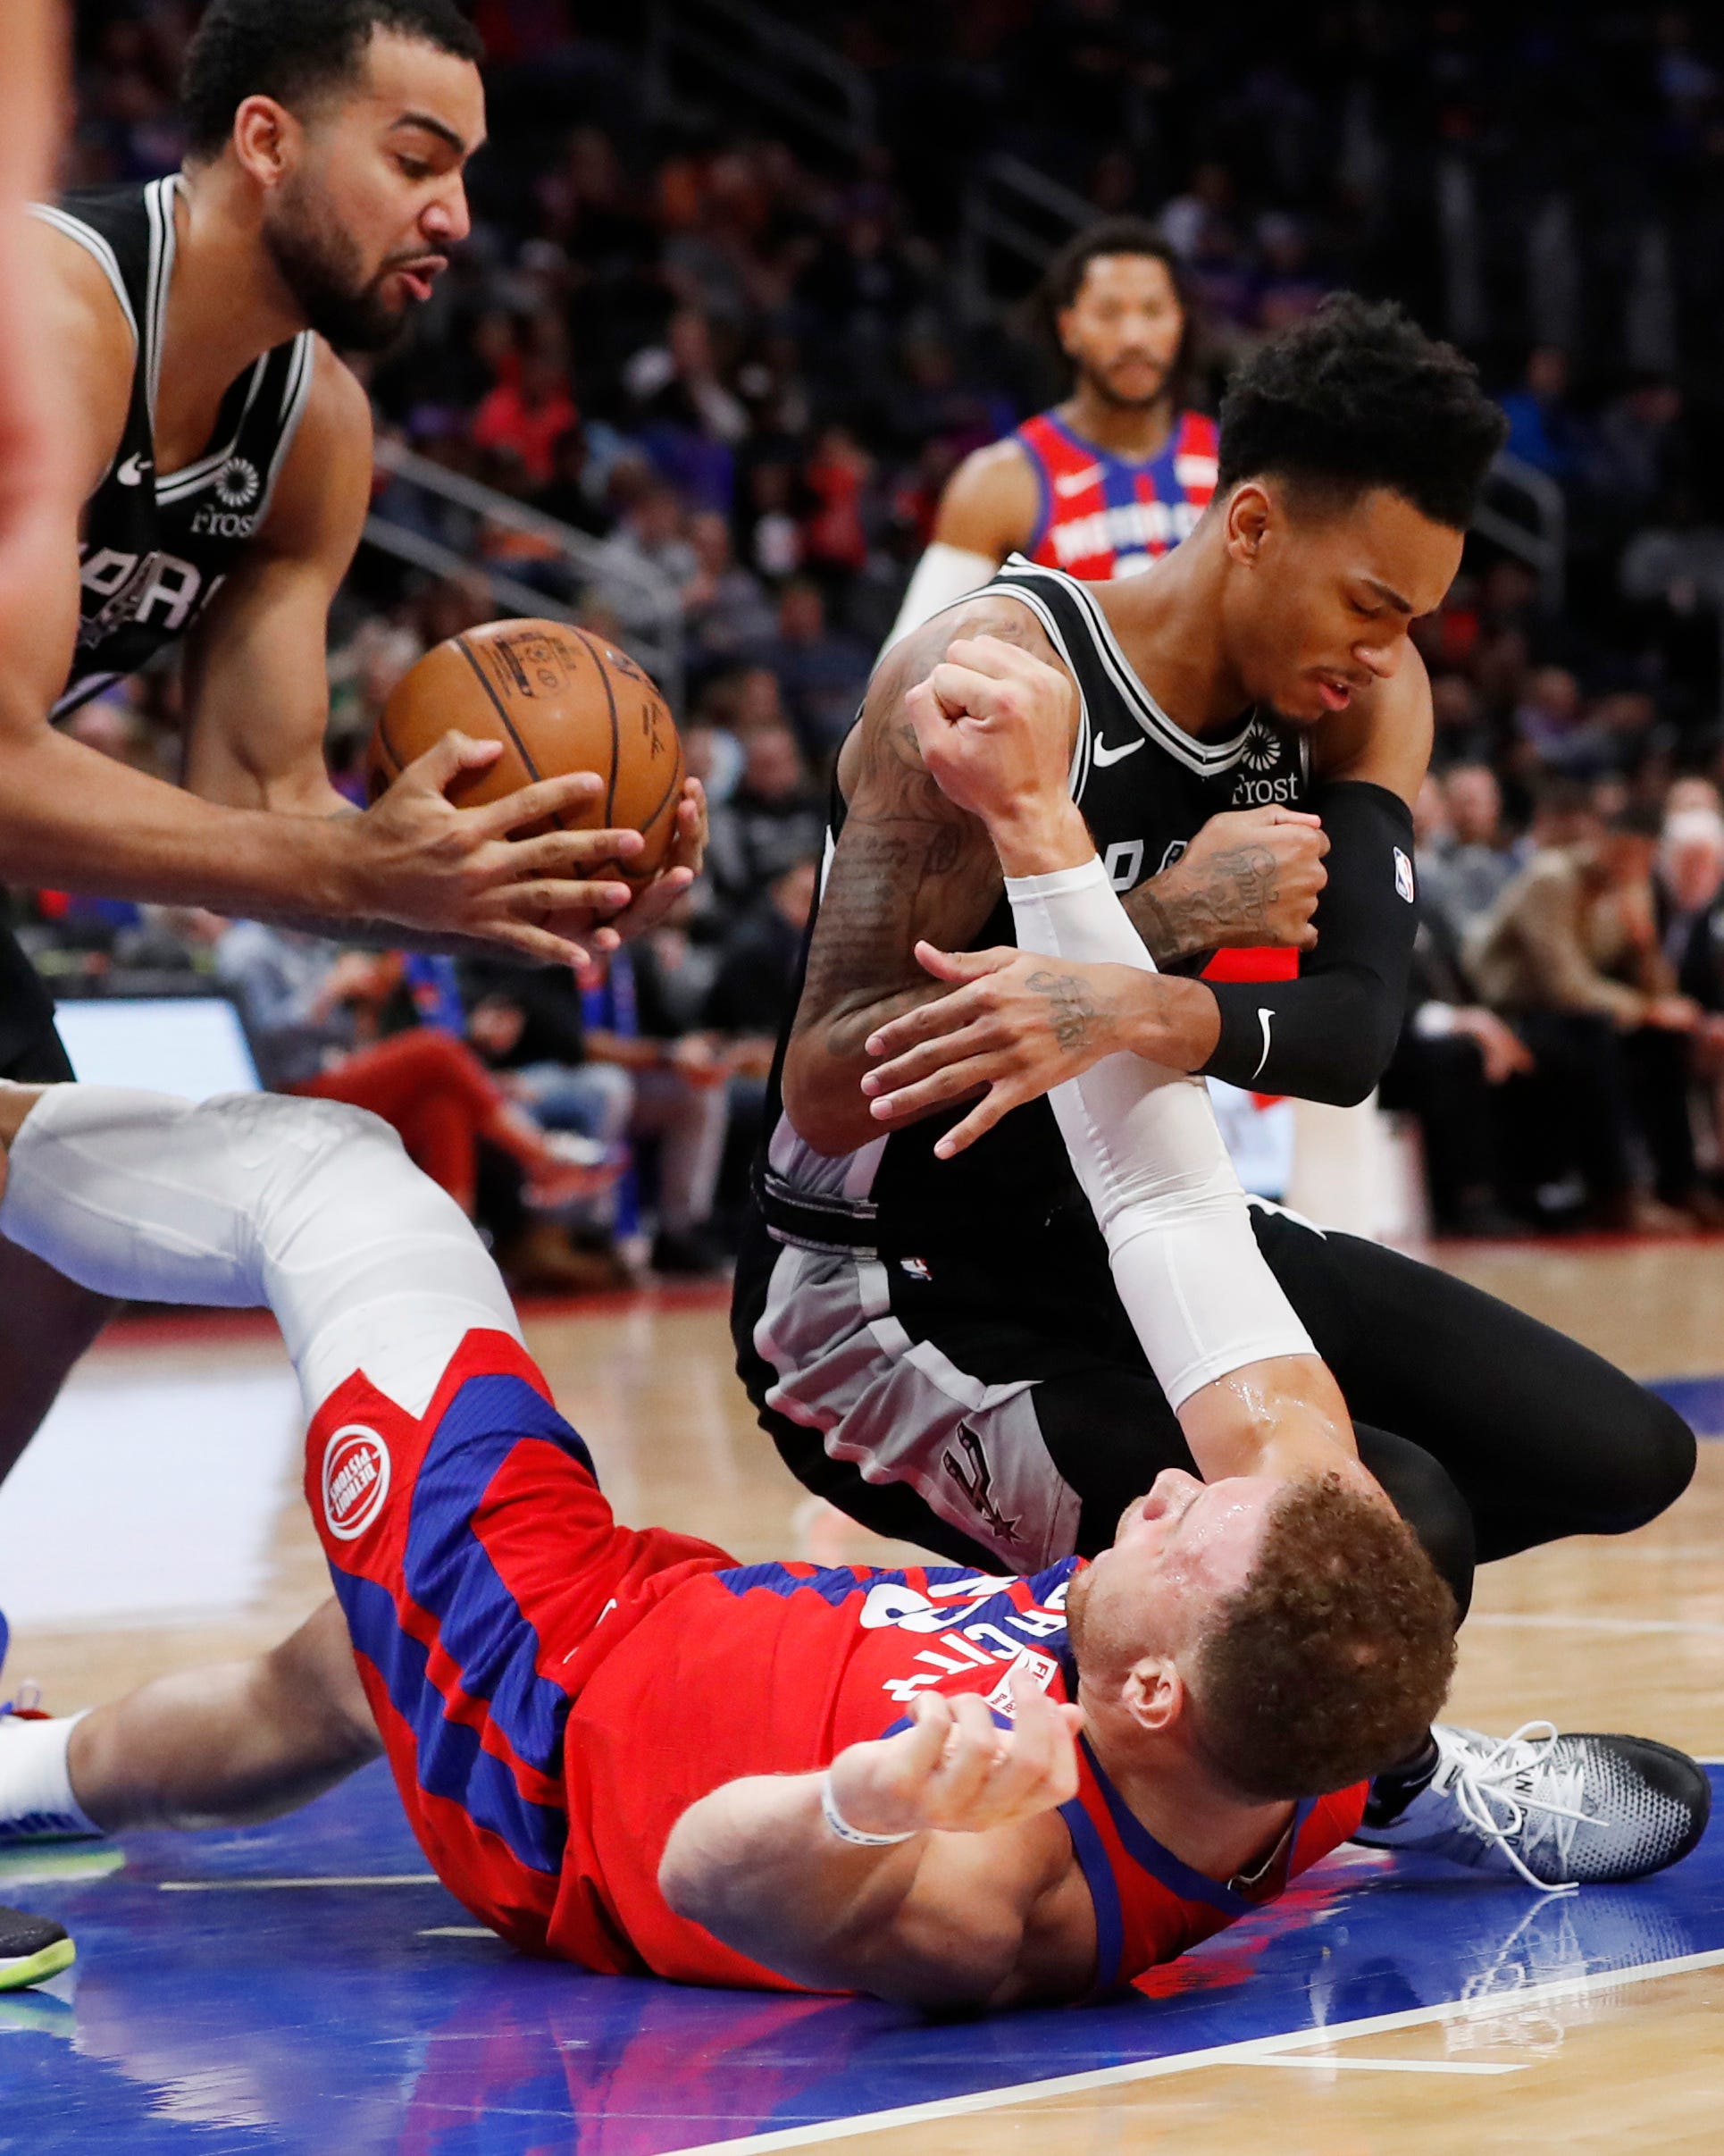 San Antonio Spurs guard Dejounte Murray, top right, knocks the ball away from Detroit Pistons forward Blake Griffin to teammate forward Trey Lyles, left, during the second half.